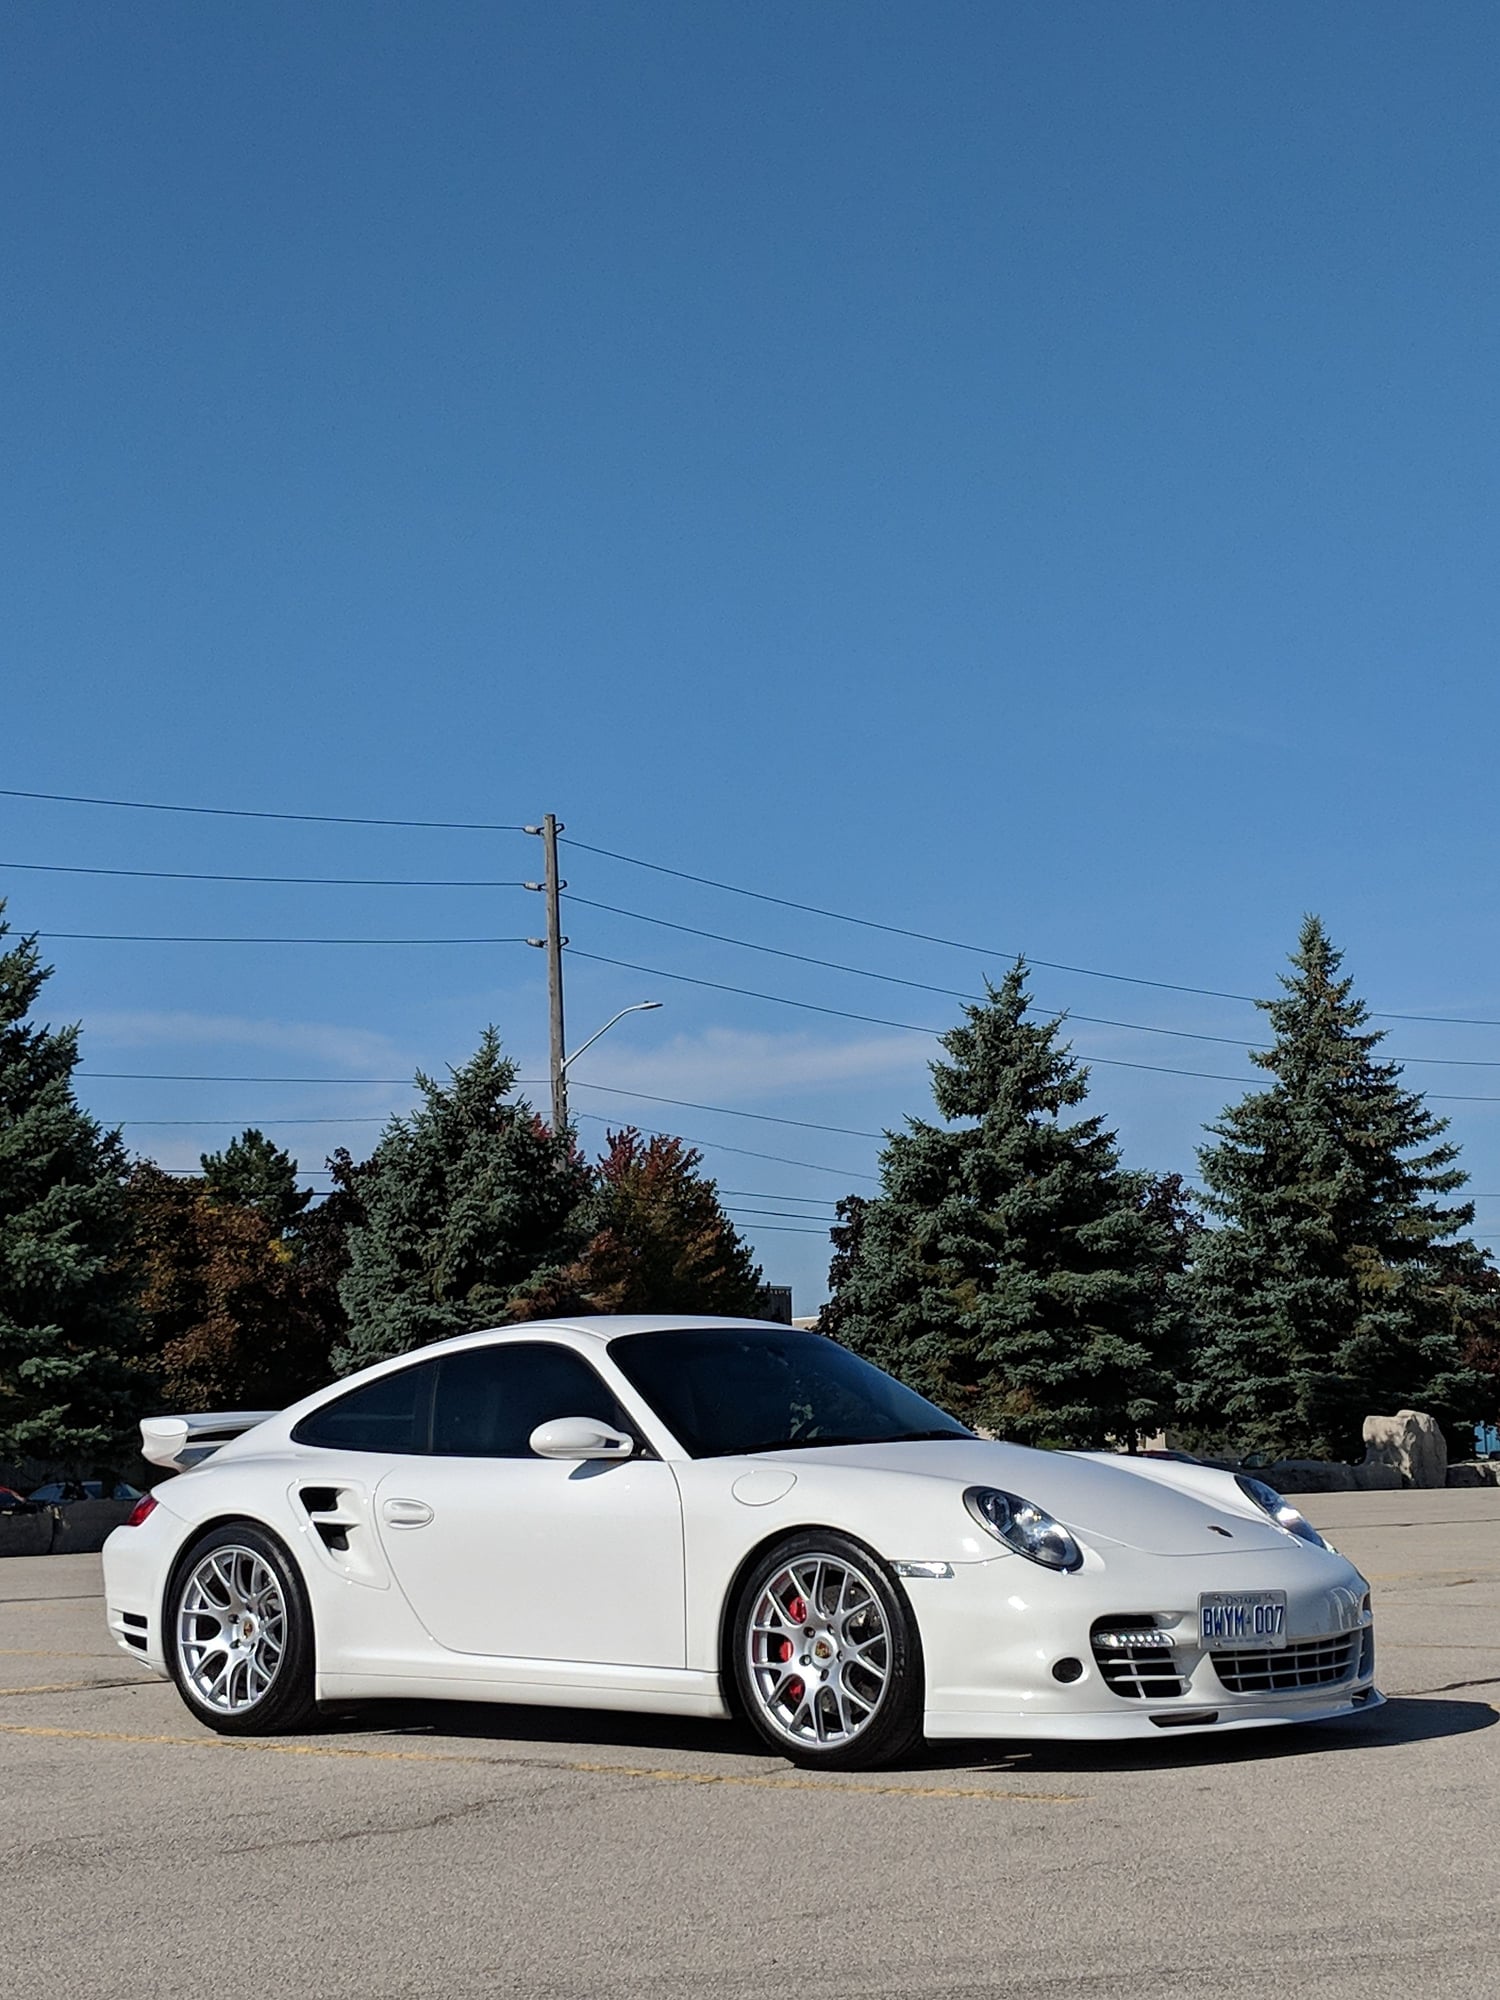 2008 Porsche 911 - 2008 911 Turbo 997TT - Manual, Coupe, Aerokit - Used - VIN WP0AD29948S784107 - 59,000 Miles - 6 cyl - 4WD - Manual - Coupe - White - Burlington, ON L7L4Y8, Canada